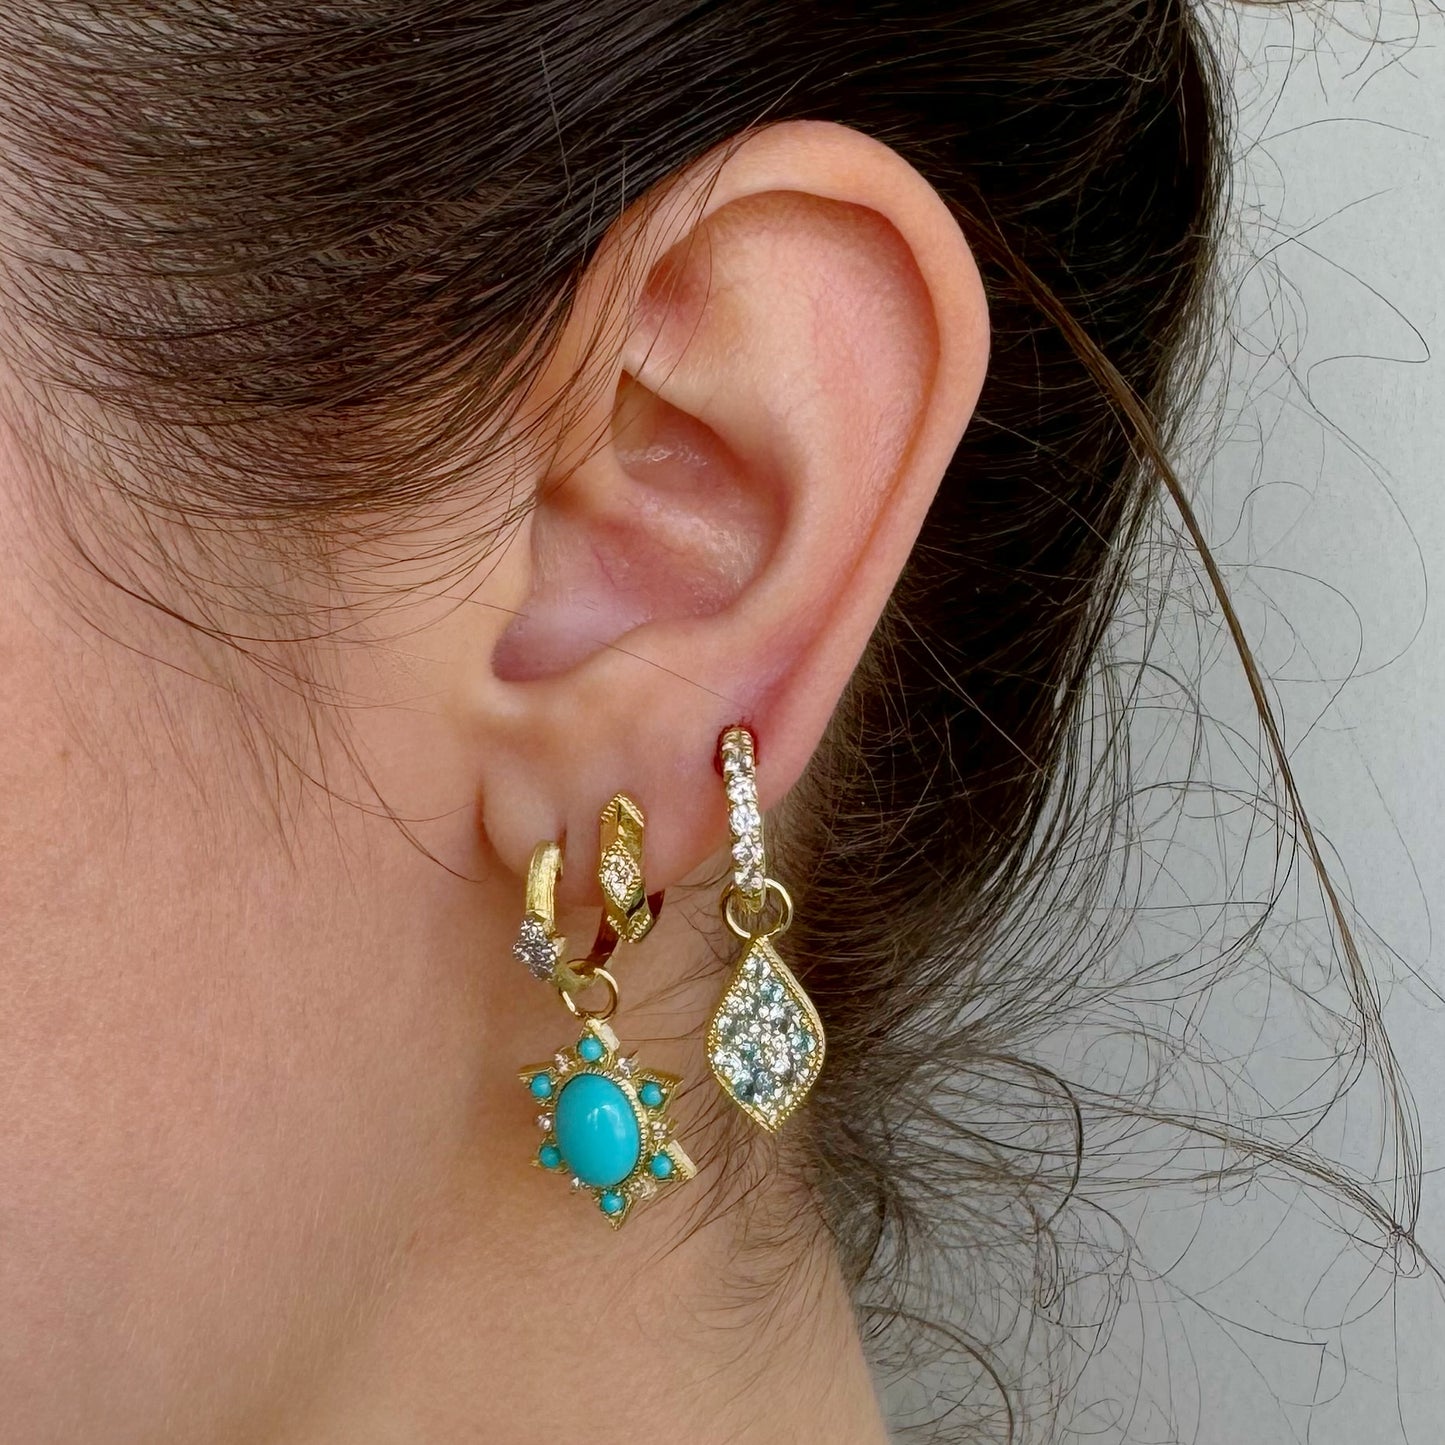 Moroccan Turquoise Sunburst Earring Charms